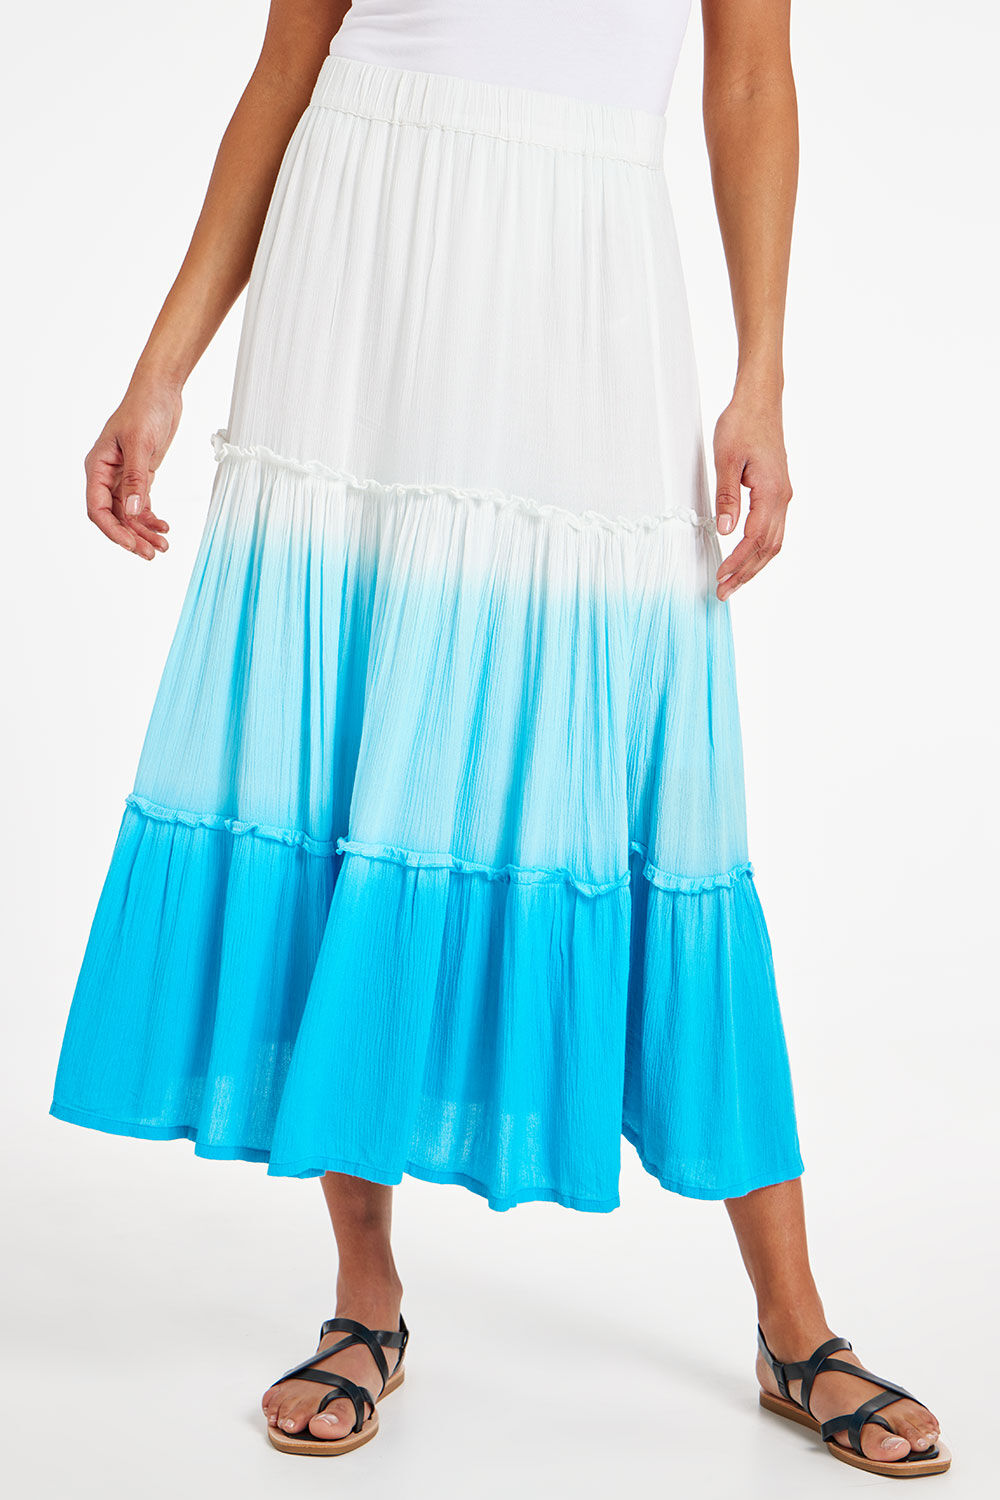 Bonmarche Turquoise Elasticated Ombre Tiered Skirt, Size: 12